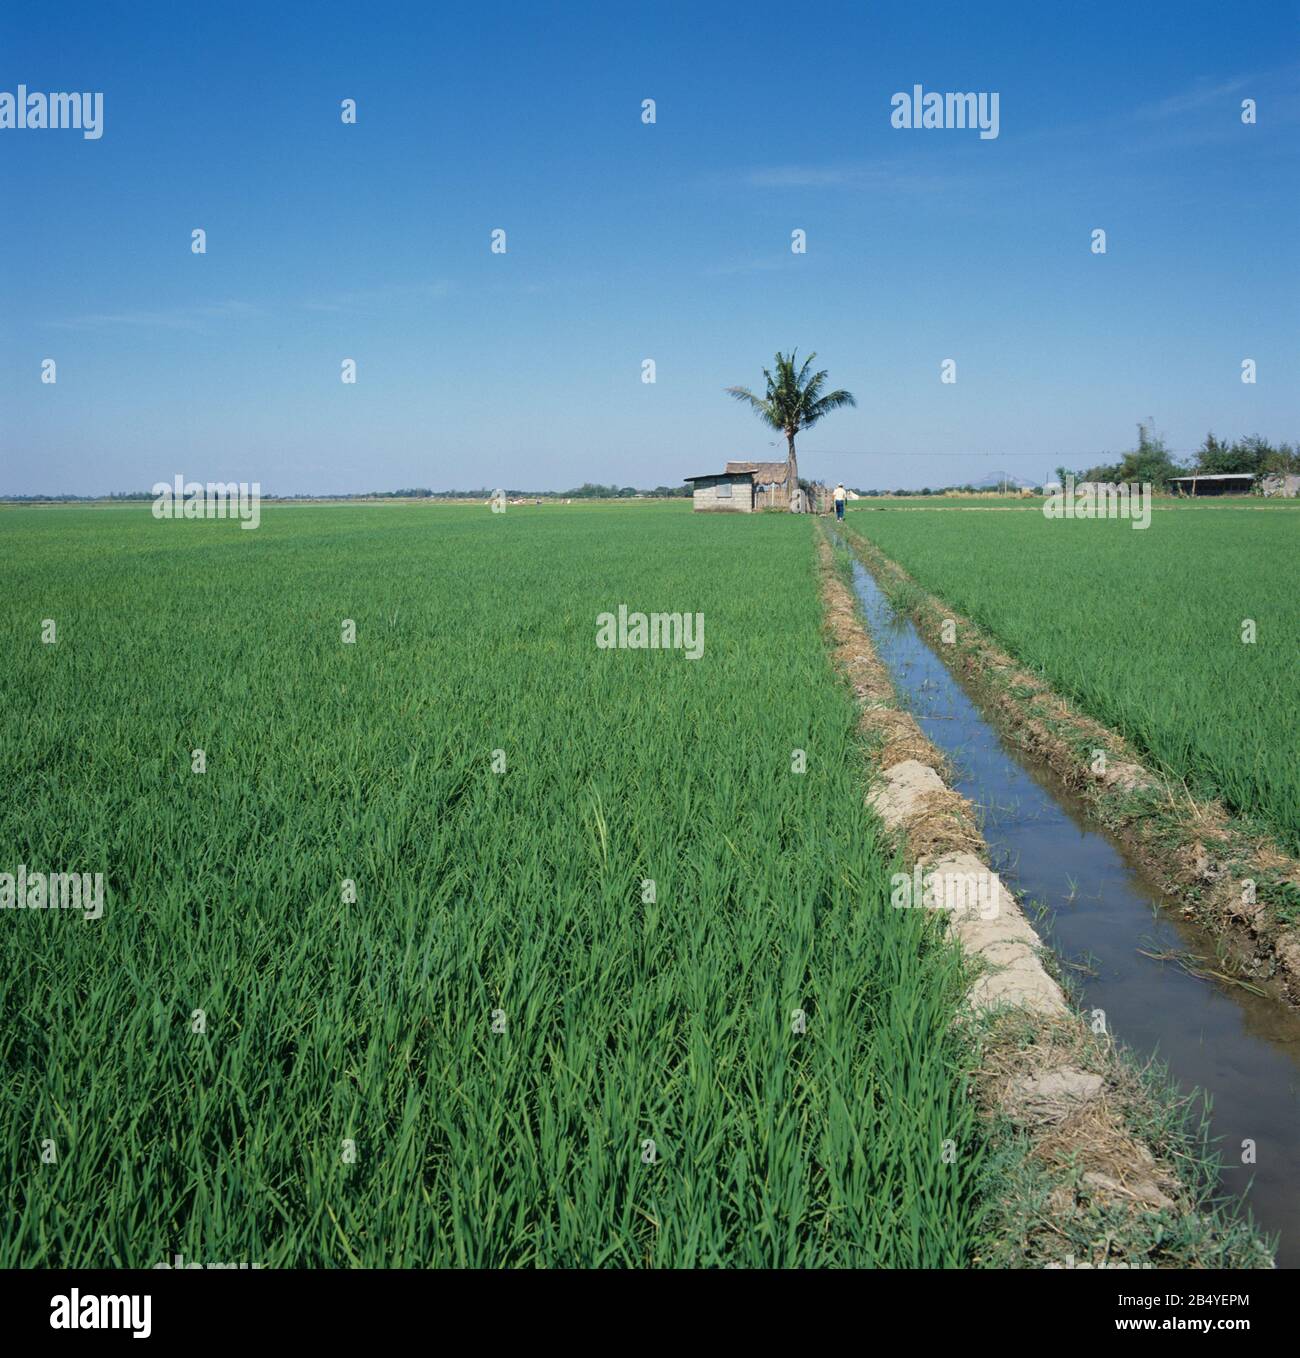 Established paddy rice (Oryza sativa) crops and irrigation canal, palm tree and hut, Luzon, Philippines Stock Photo